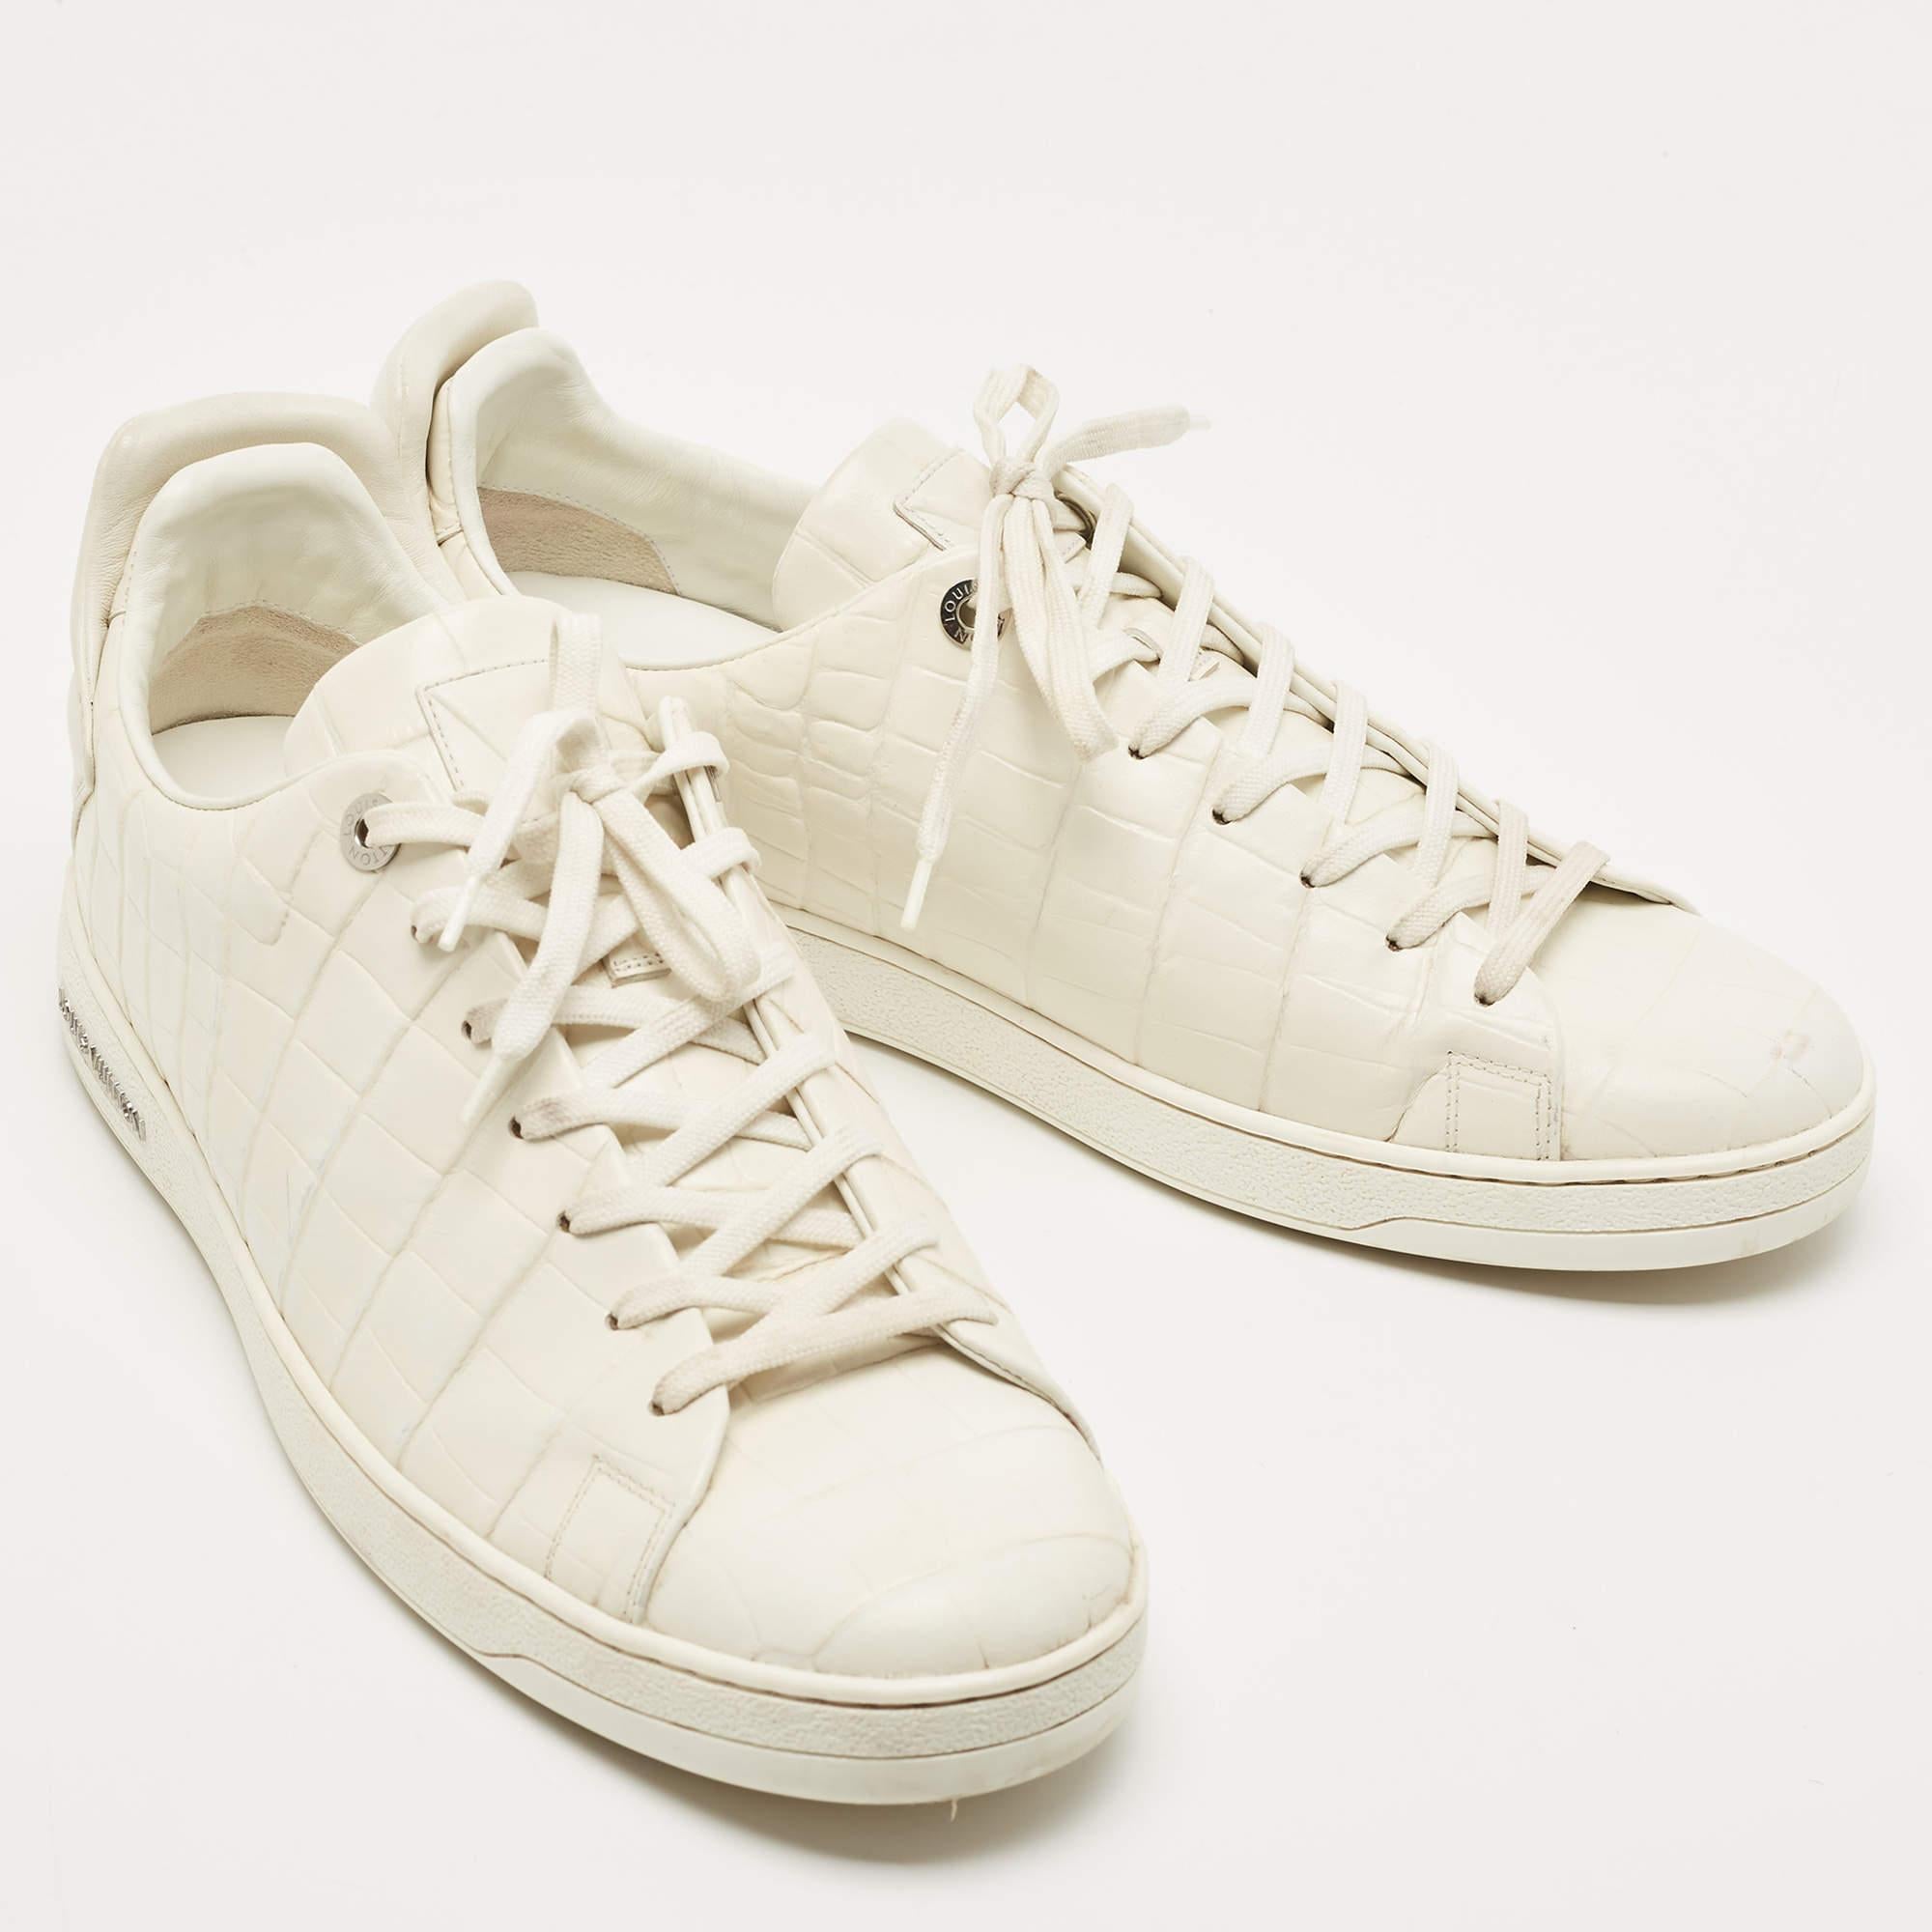 Louis Vuitton White Leather Croc Embossed Leather Frontrow Low Top Sneakers Size In Good Condition For Sale In Dubai, Al Qouz 2